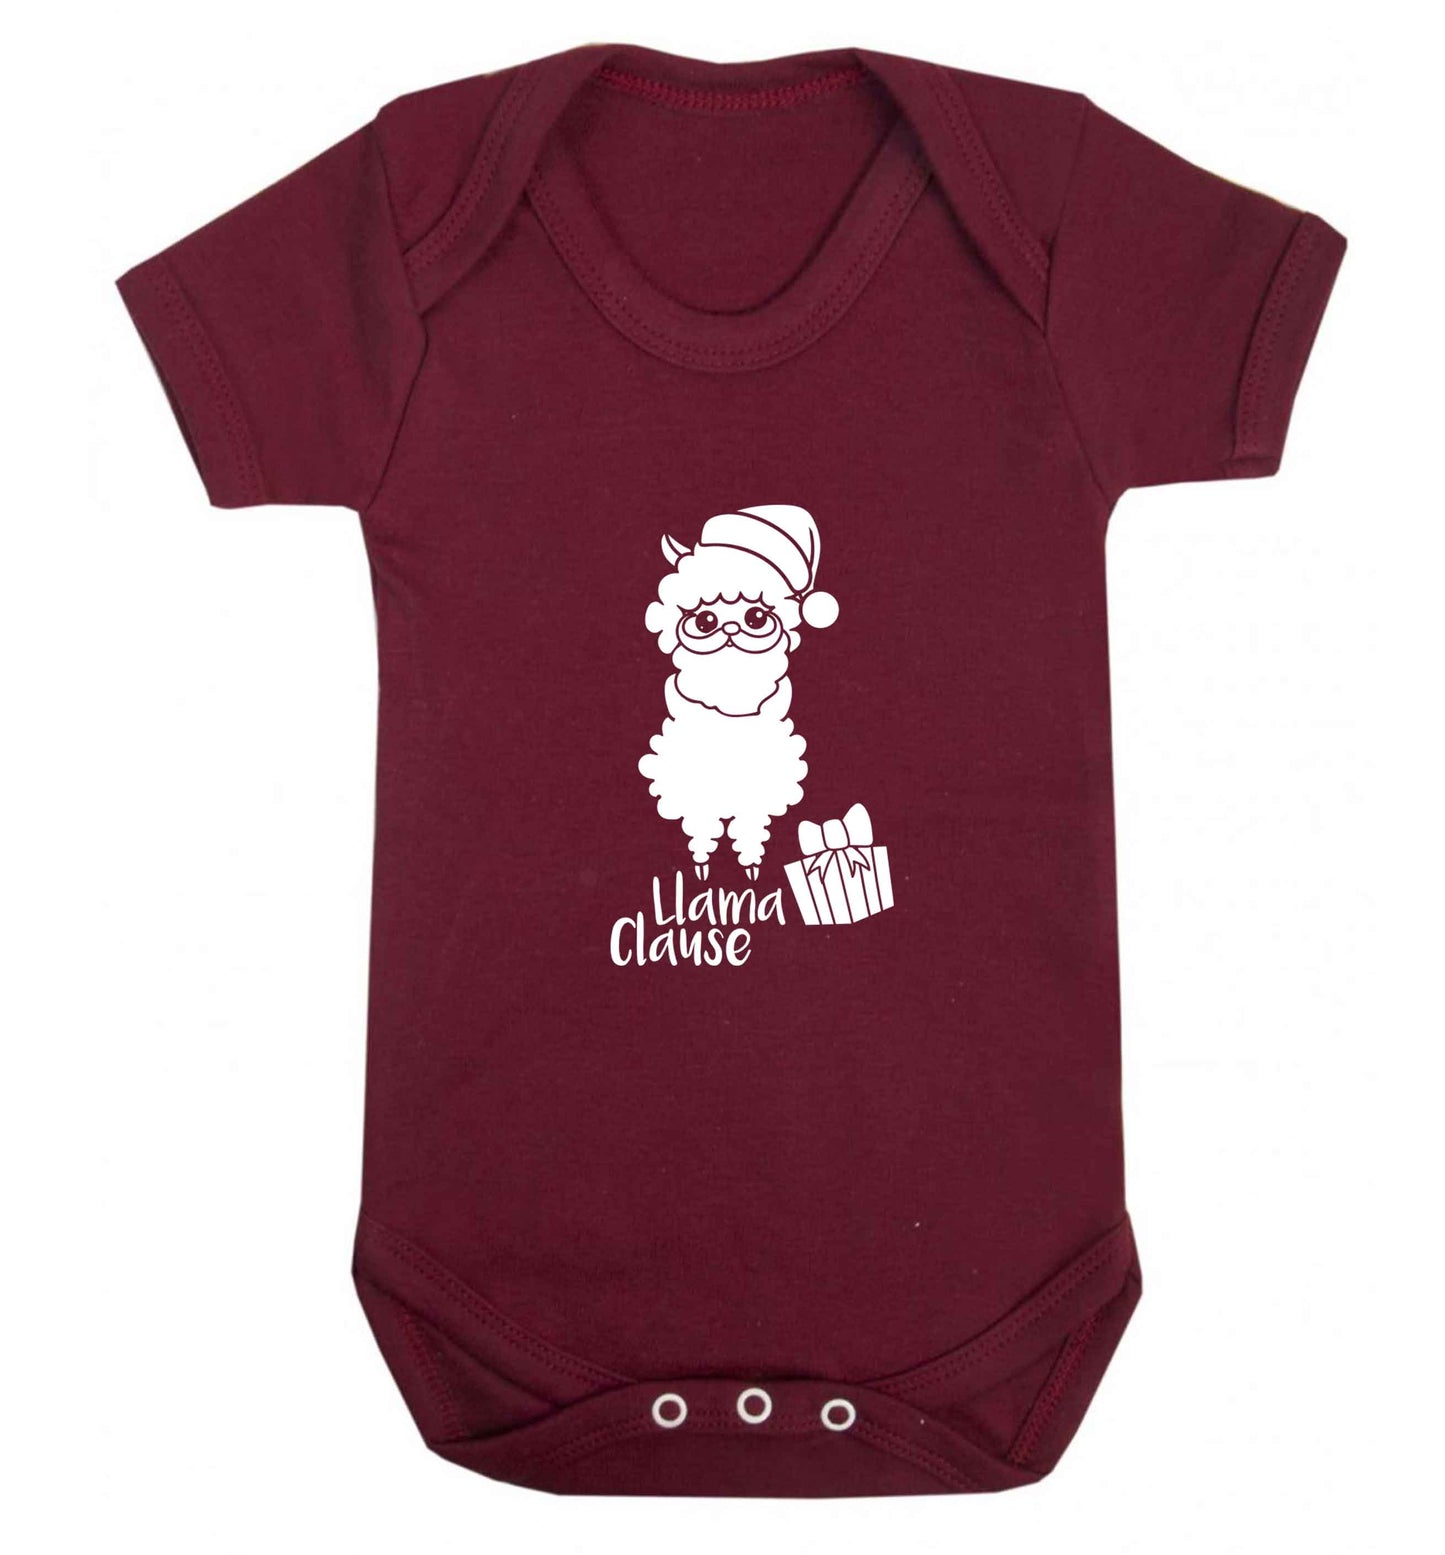 Llama Clause baby vest maroon 18-24 months